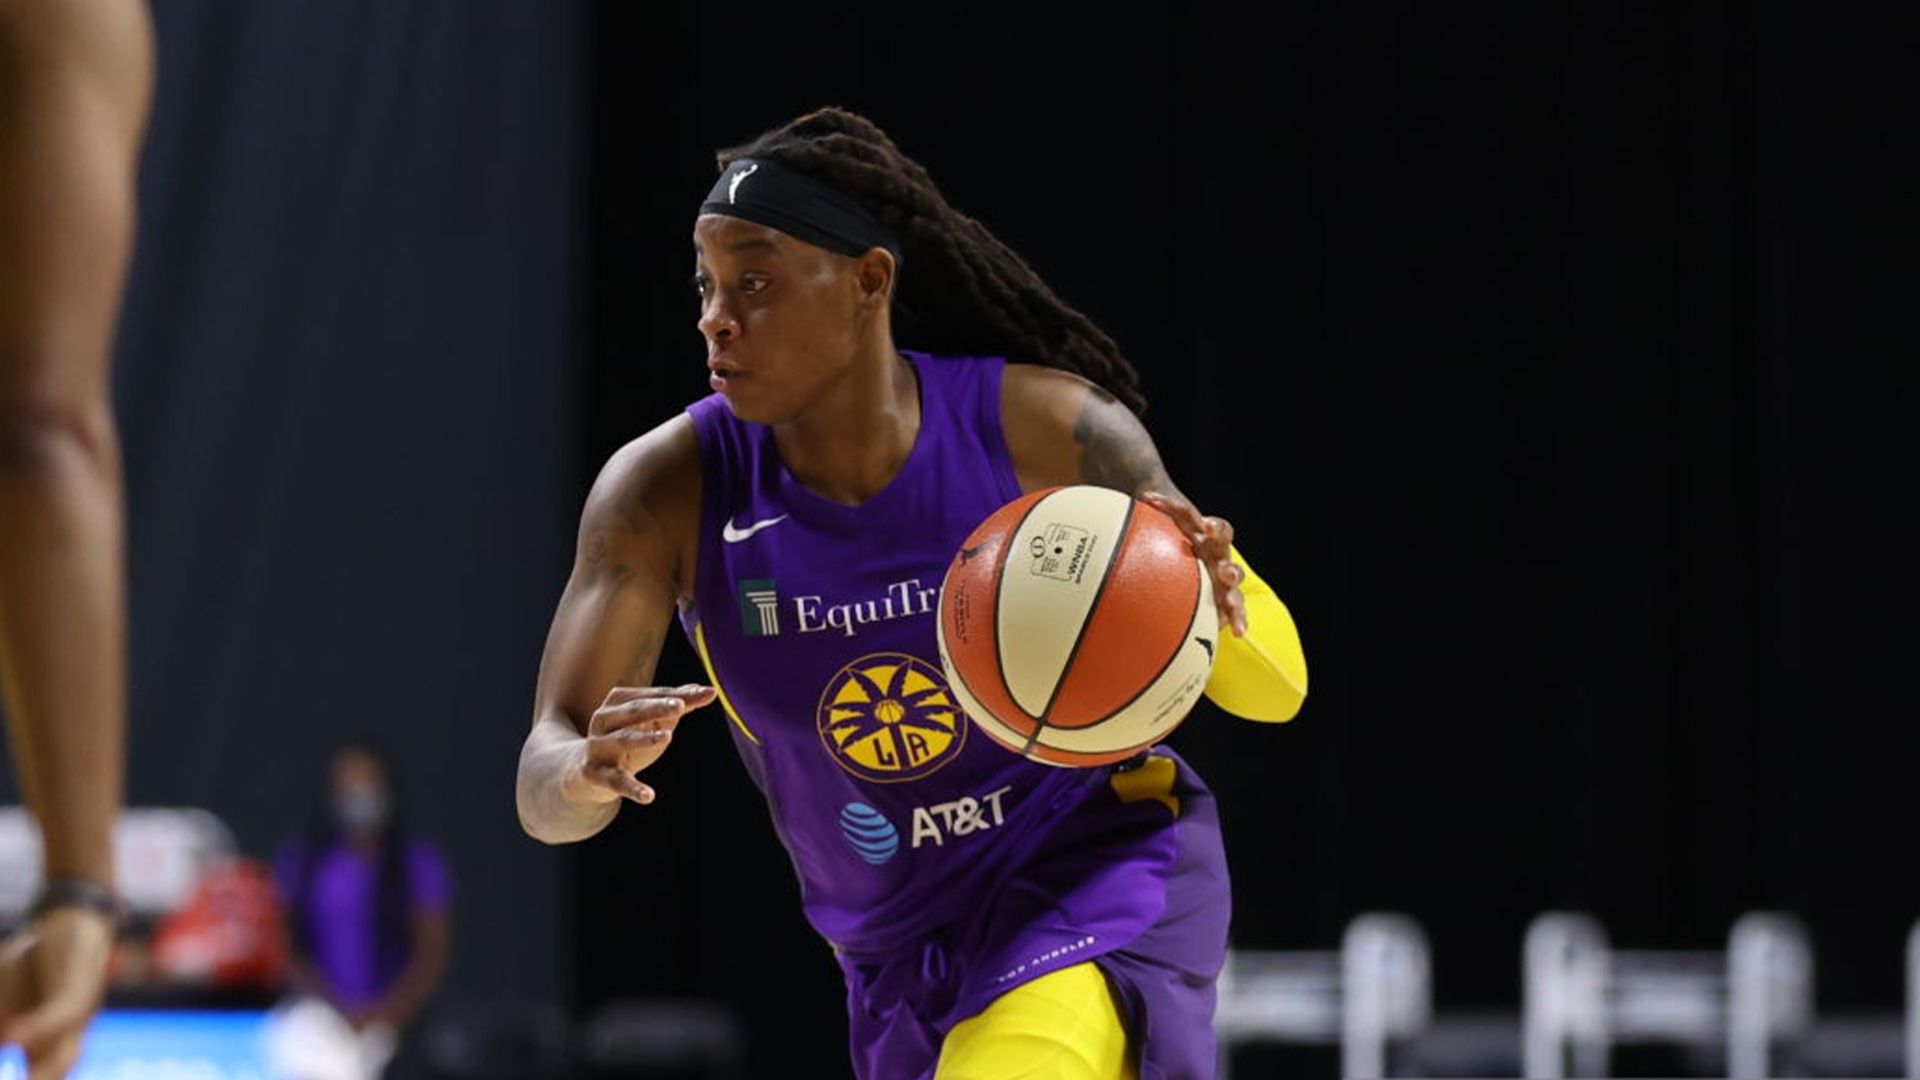 Canes in the WNBA: Week 2